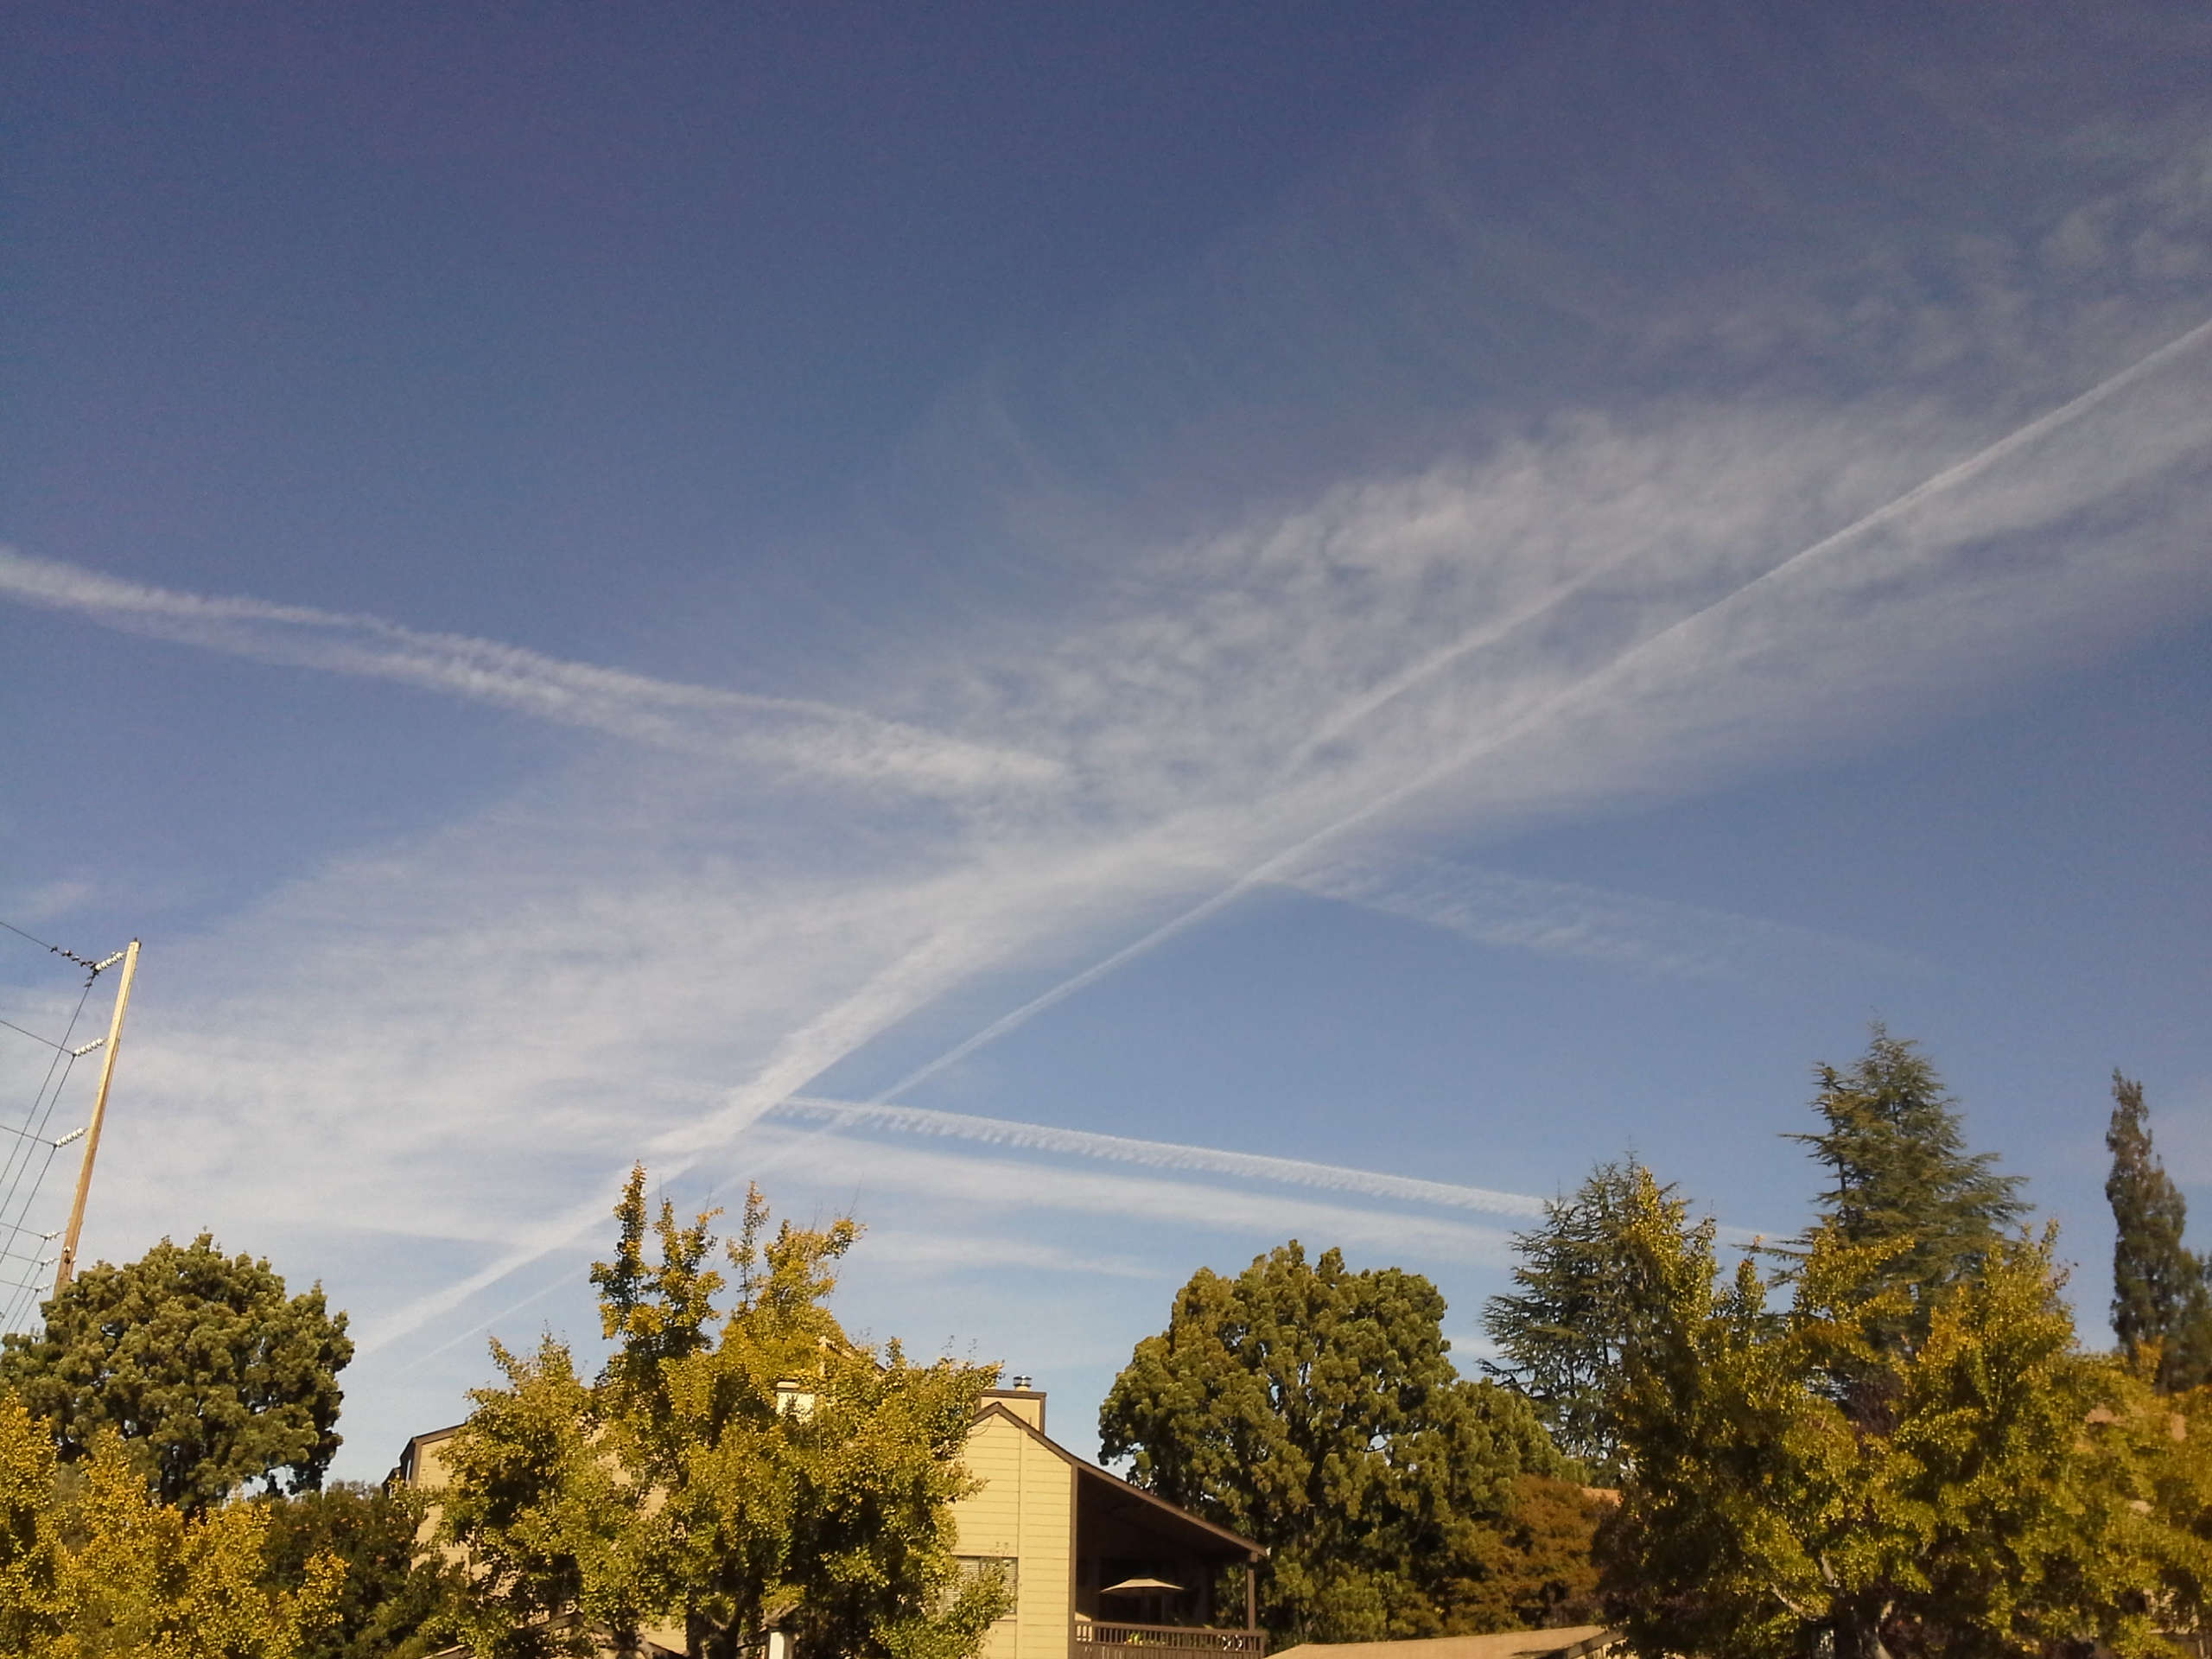 Chemtrails or Contrails?